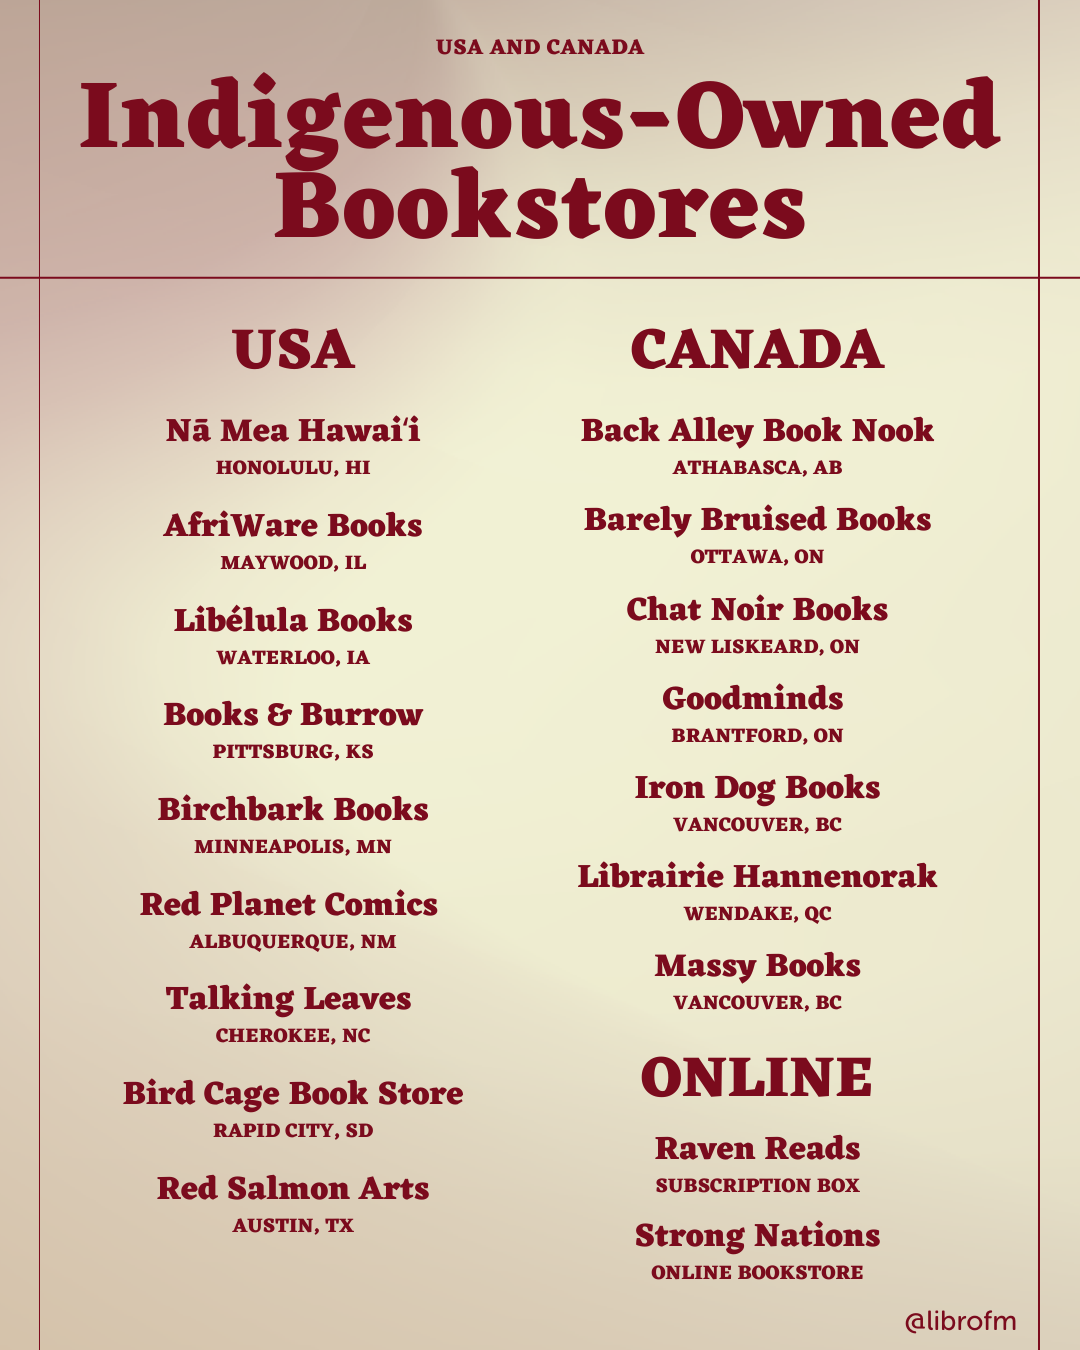 Indigenous-owned bookstores in the USA and Canada. Listed are 9 stores in the USA, 7 in Canada, and 2 online. See the full list at https://blog.libro.fm/indigenous-owned-bookstores/